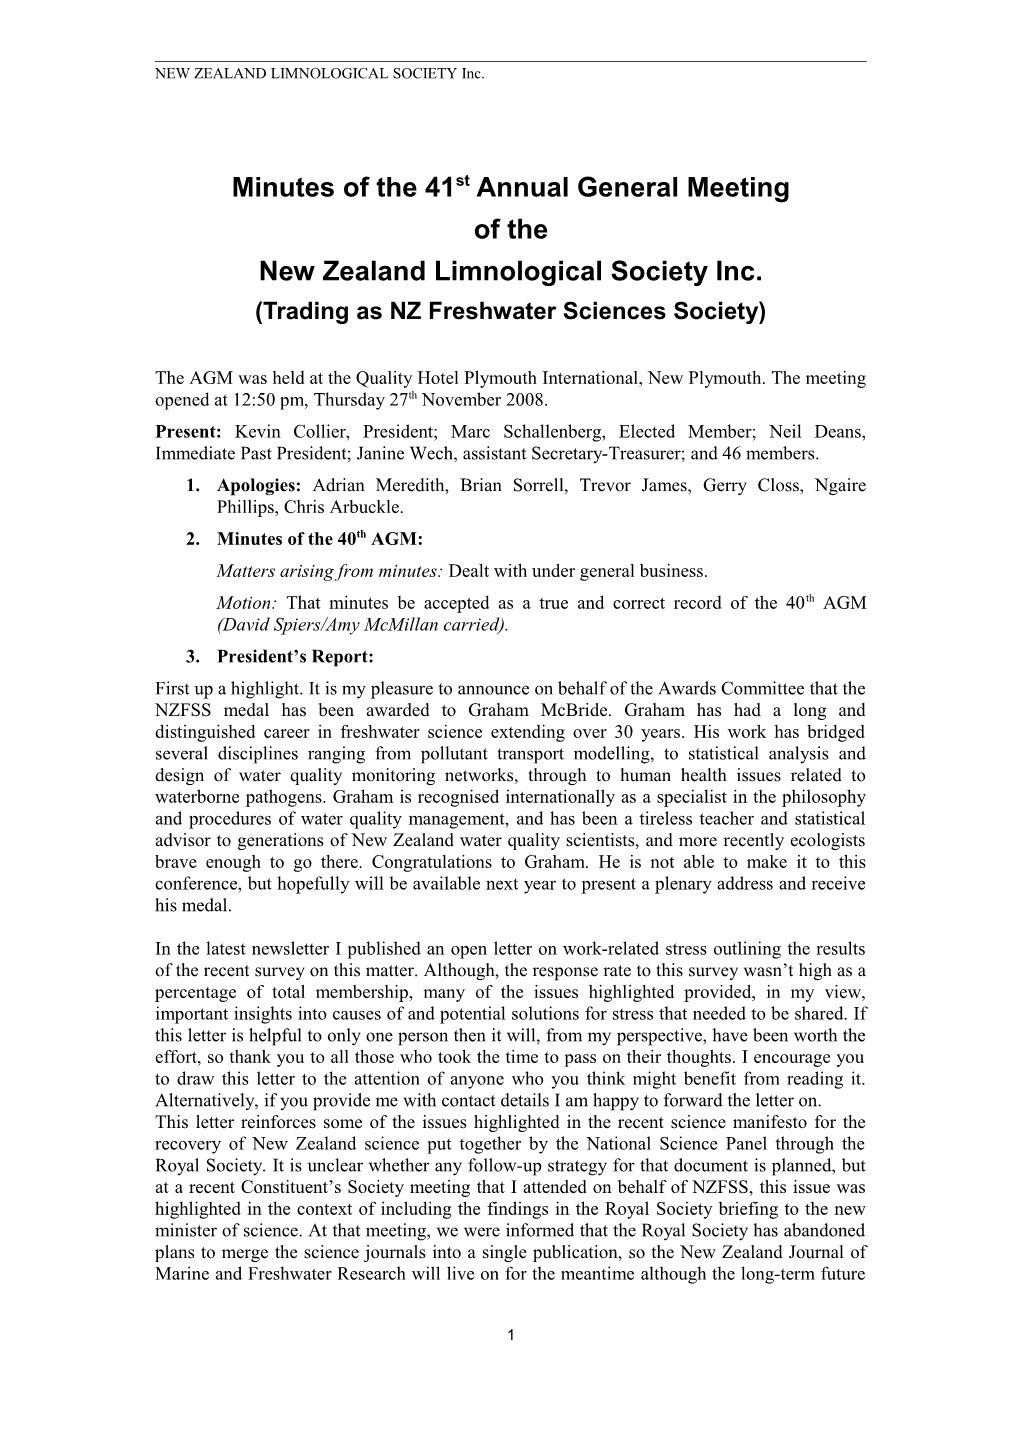 Minutes of Executive Meeting of NZFSS